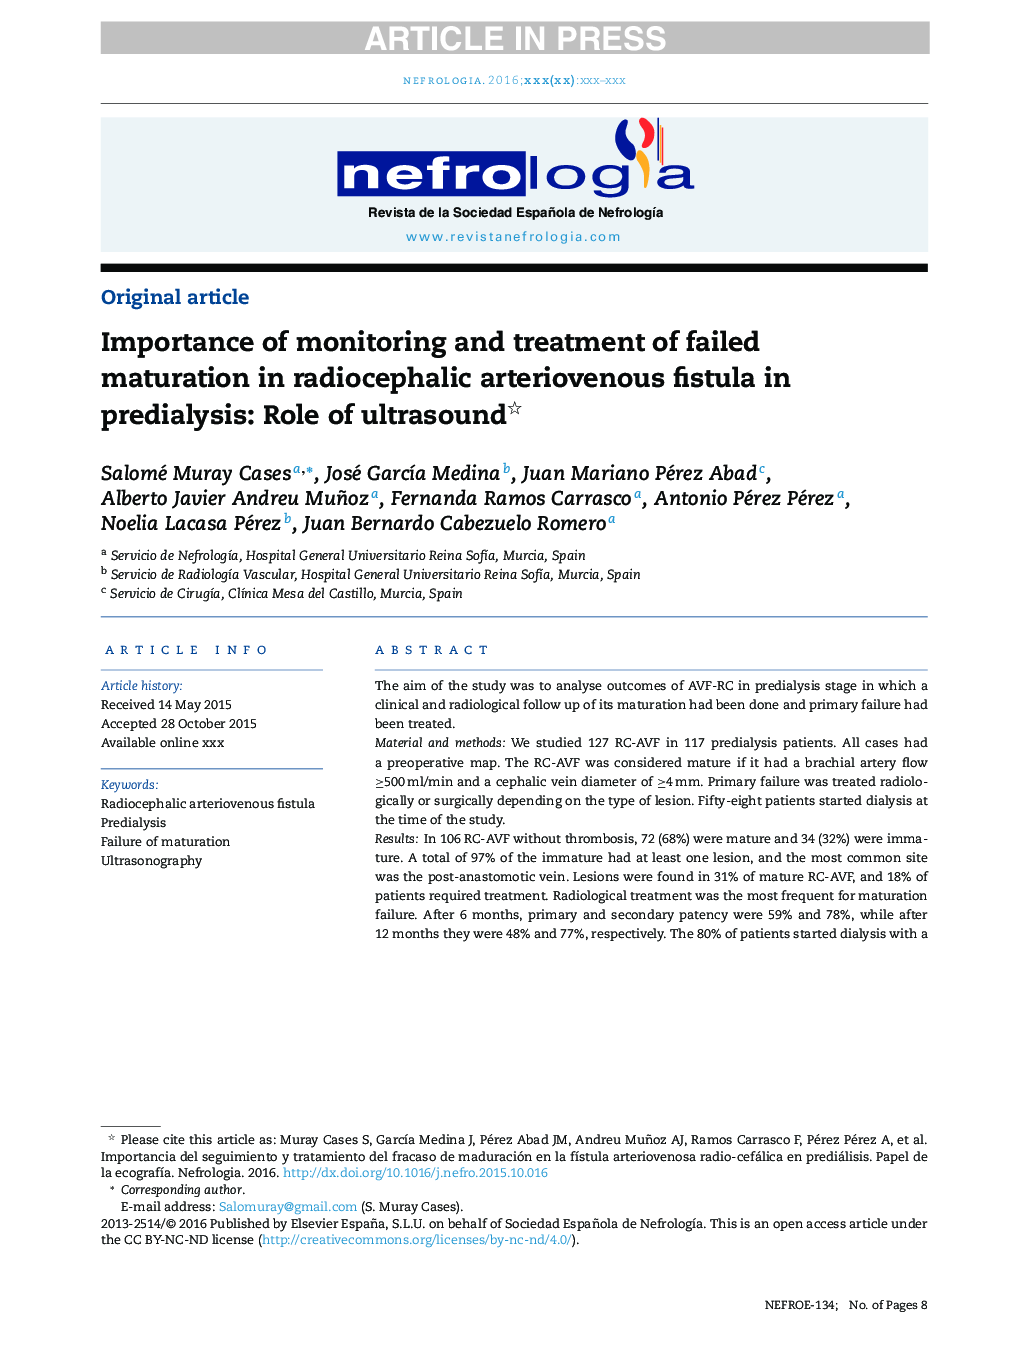 Importance of monitoring and treatment of failed maturation in radiocephalic arteriovenous fistula in predialysis: Role of ultrasound